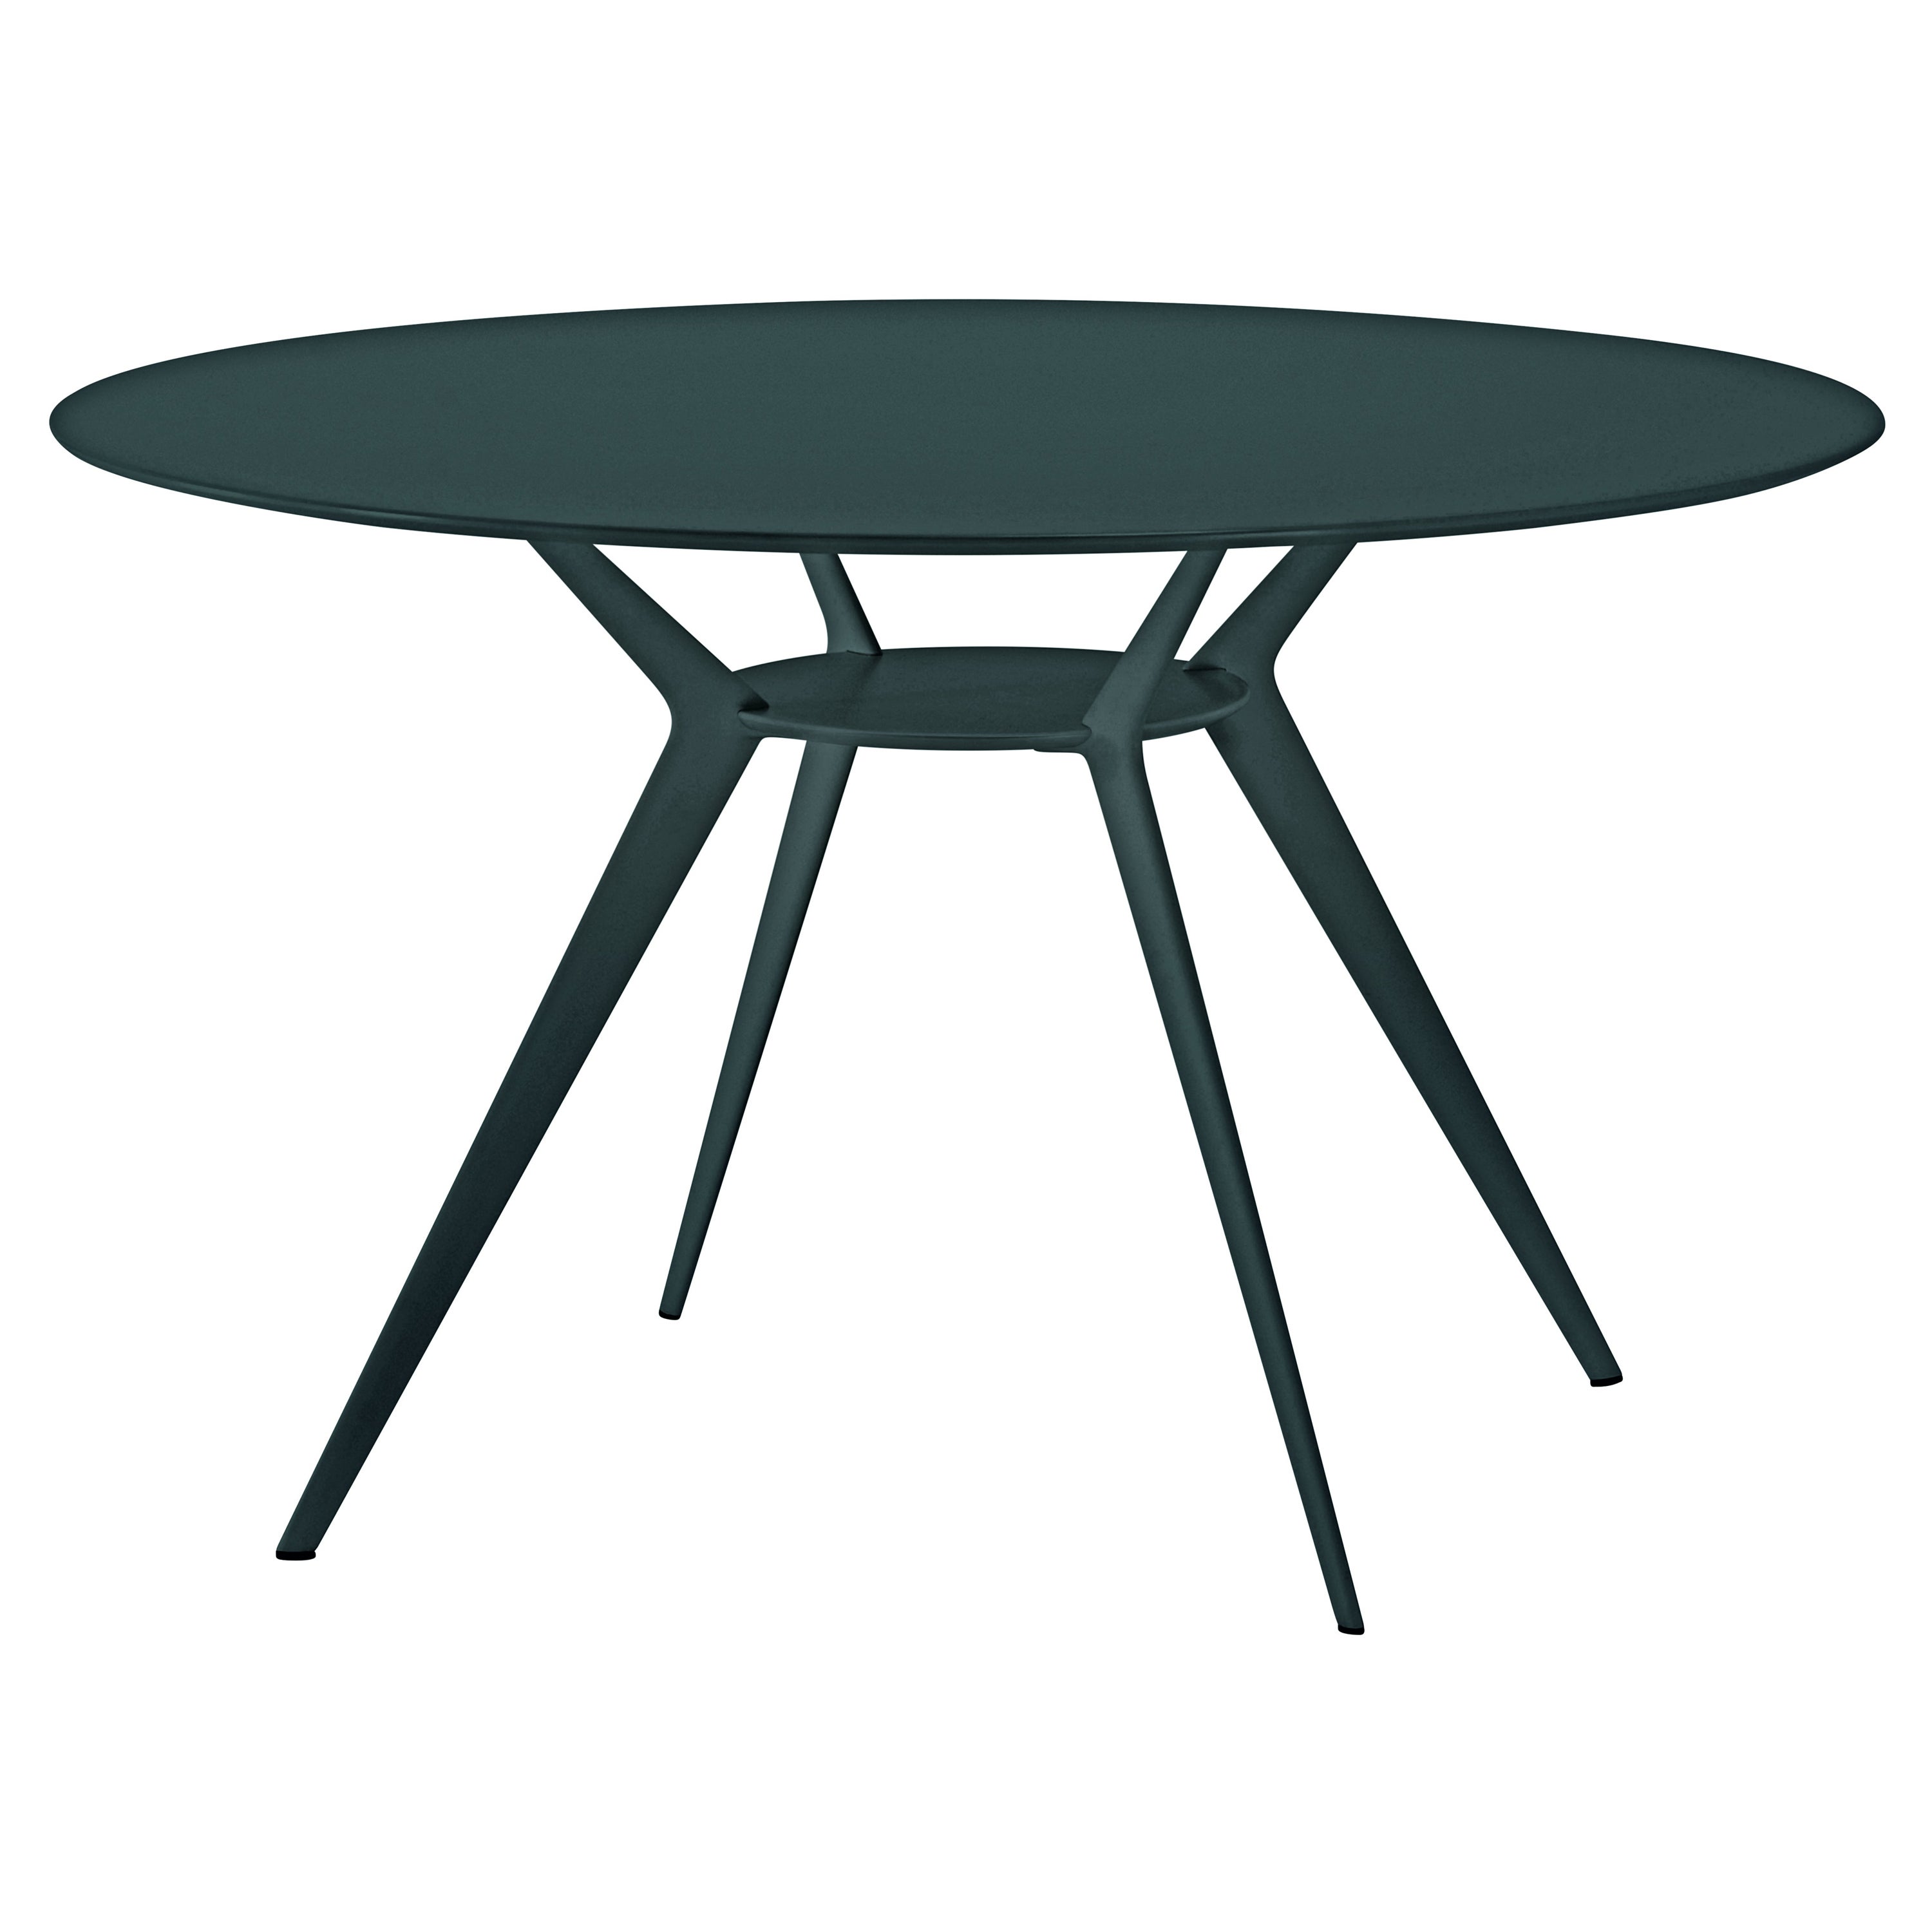 Alias Biplane 402 Table in Graphite Grey MDF Top and Lacquered Aluminium Frame For Sale